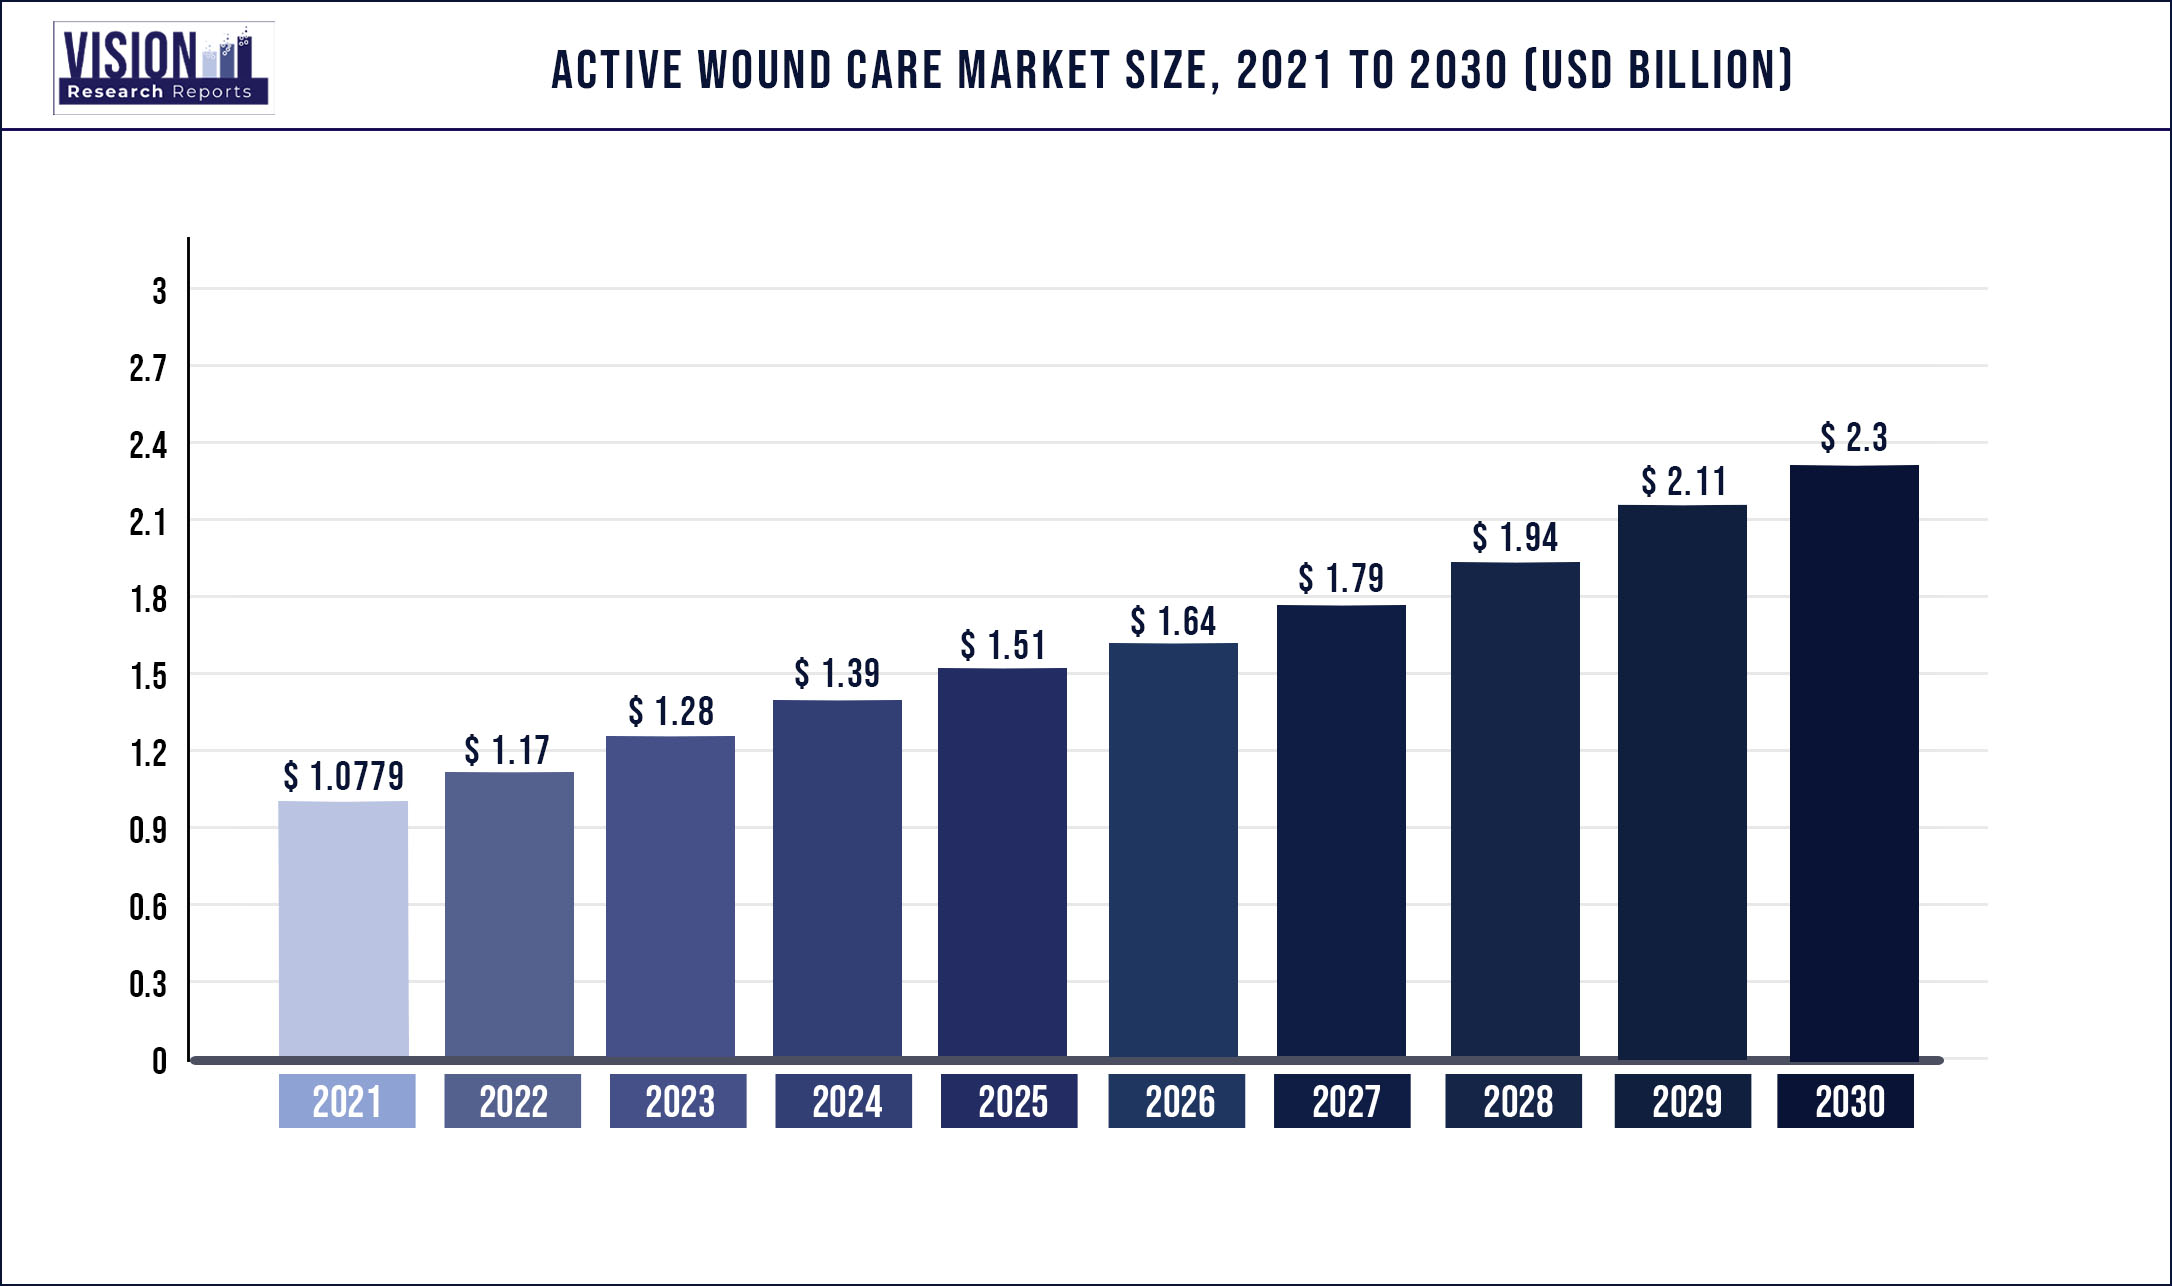 Active Wound Care Market Size 2021 to 2030